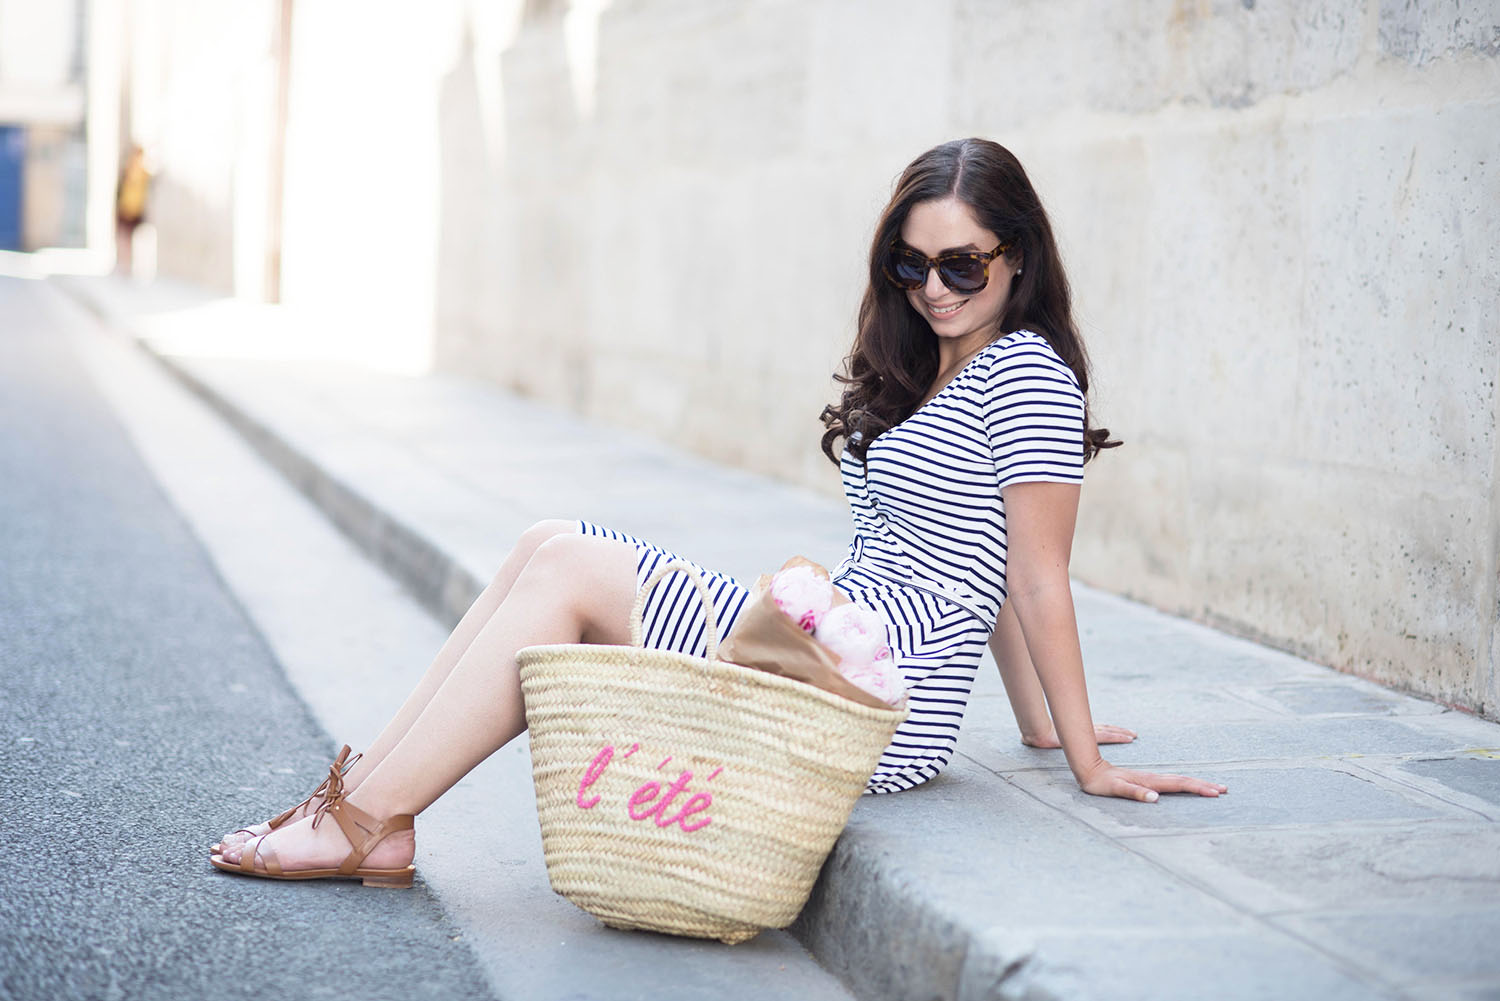 Style blogger Cee Fardoe of Cooc & Vera sits on the street in le Marais with a Sezane l'ete straw tote